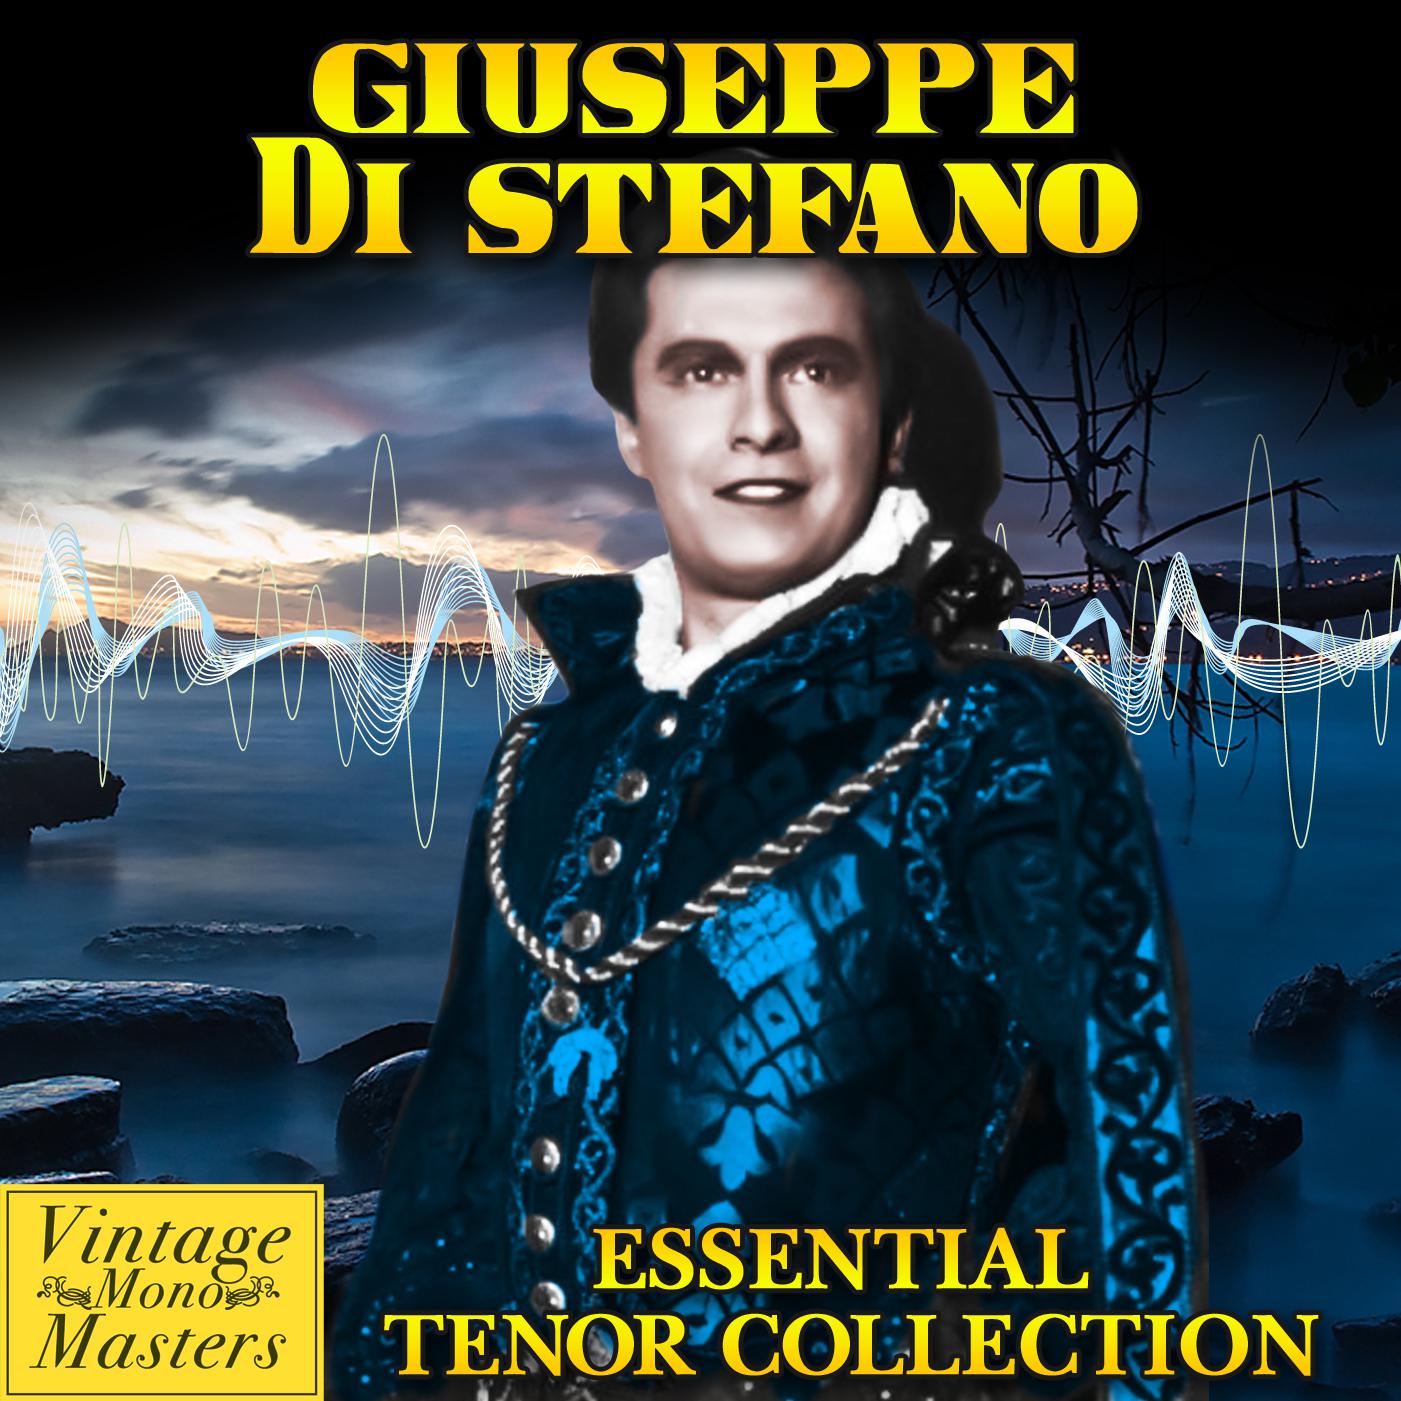 Essential Tenor Collection